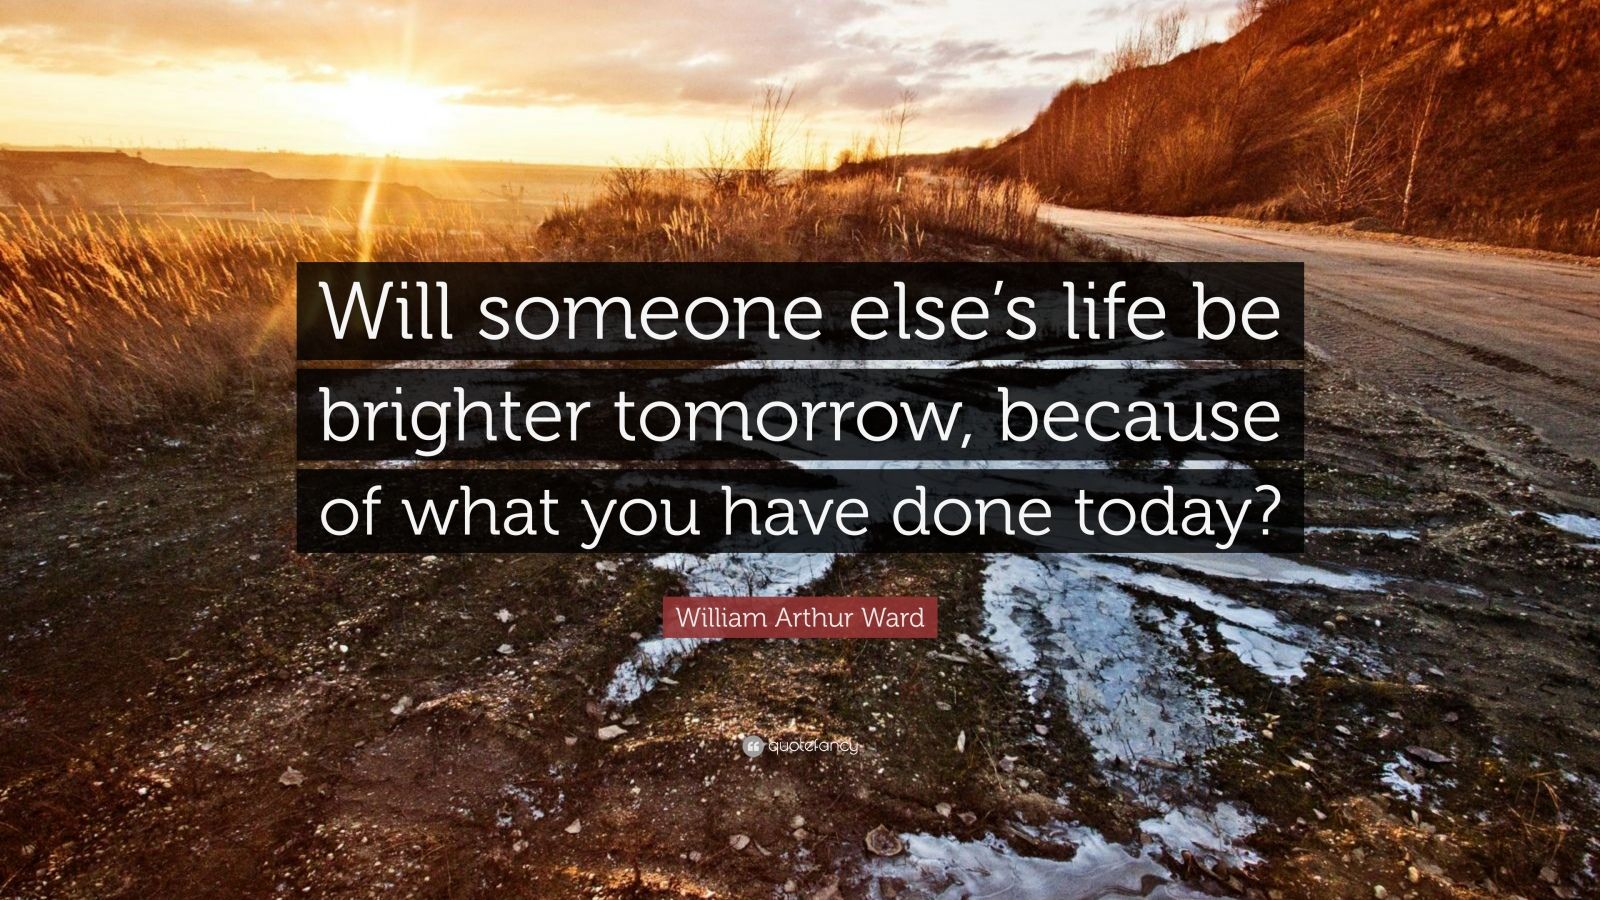 William Arthur Ward Quote: “Will someone else’s life be brighter ...